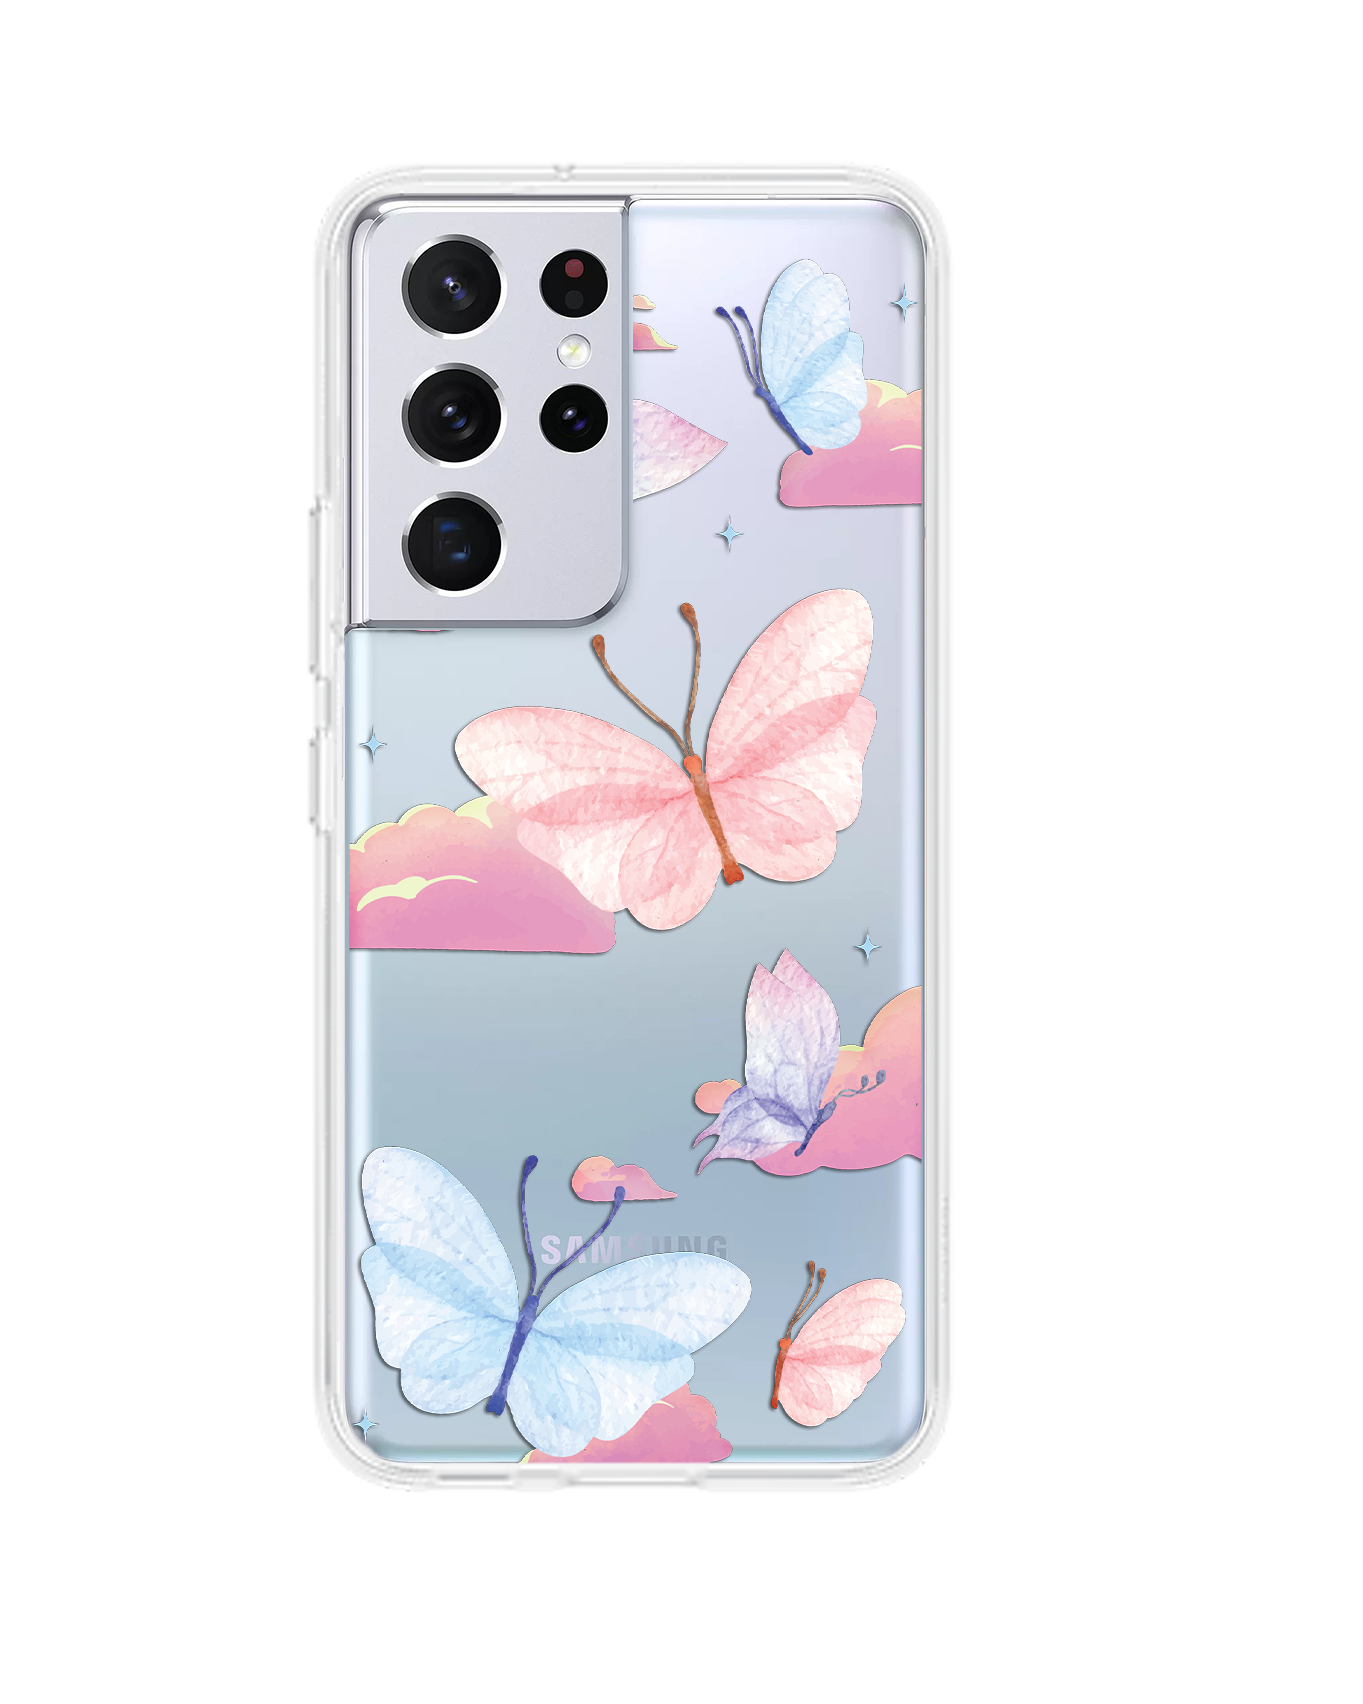 Android Rearguard Hybrid Case - Butterfly & Clouds